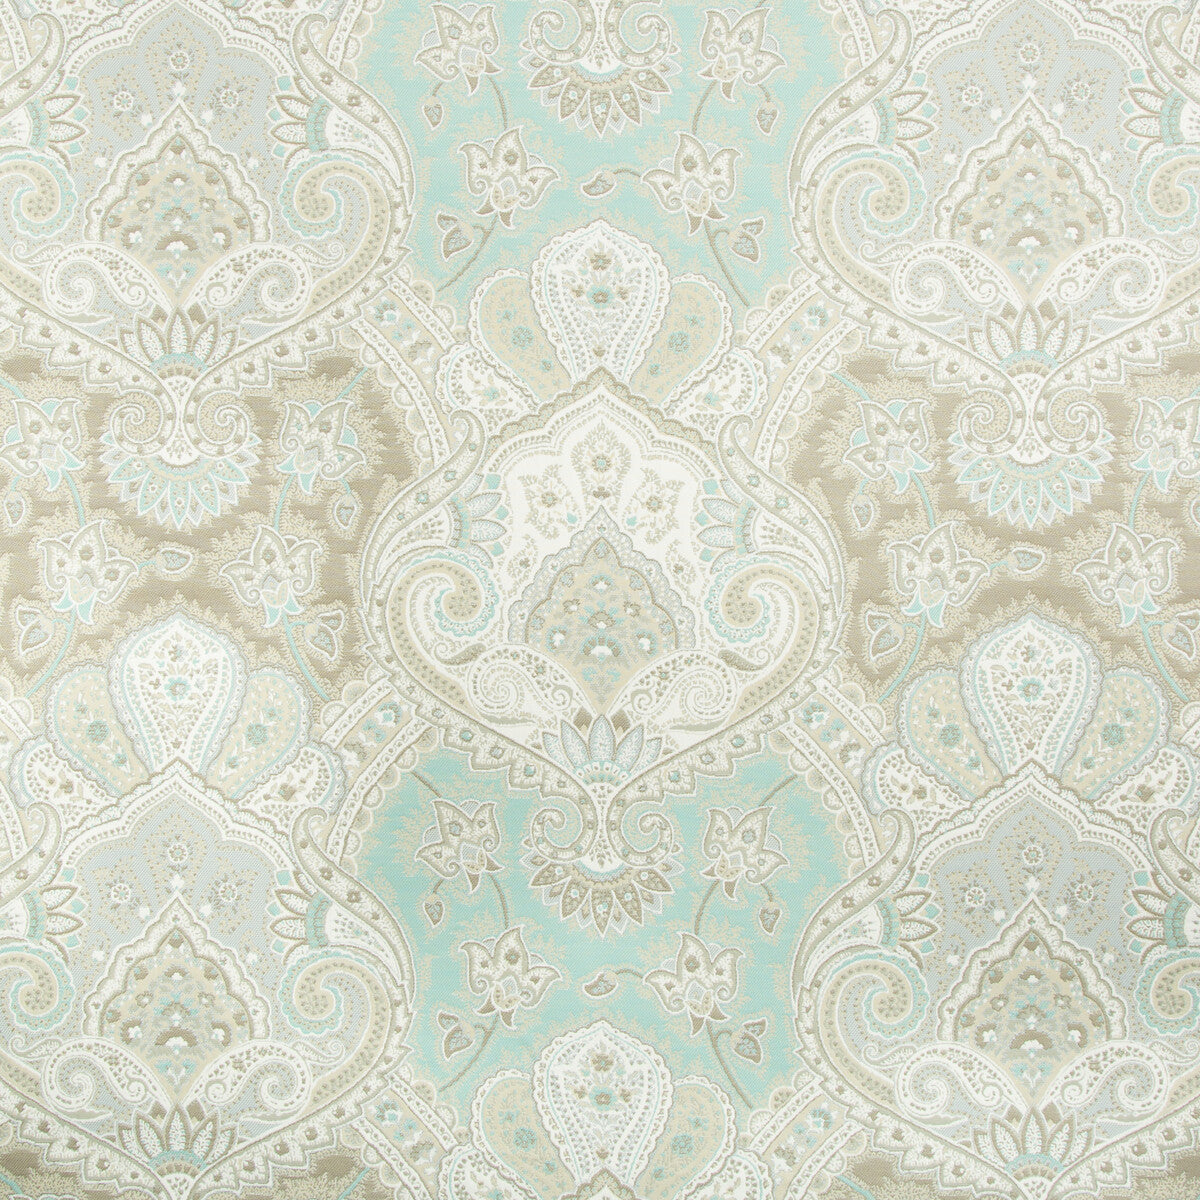 Artemest fabric in surf color - pattern 34558.1613.0 - by Kravet Design in the Echo Indoor Outdoor Ibiza collection